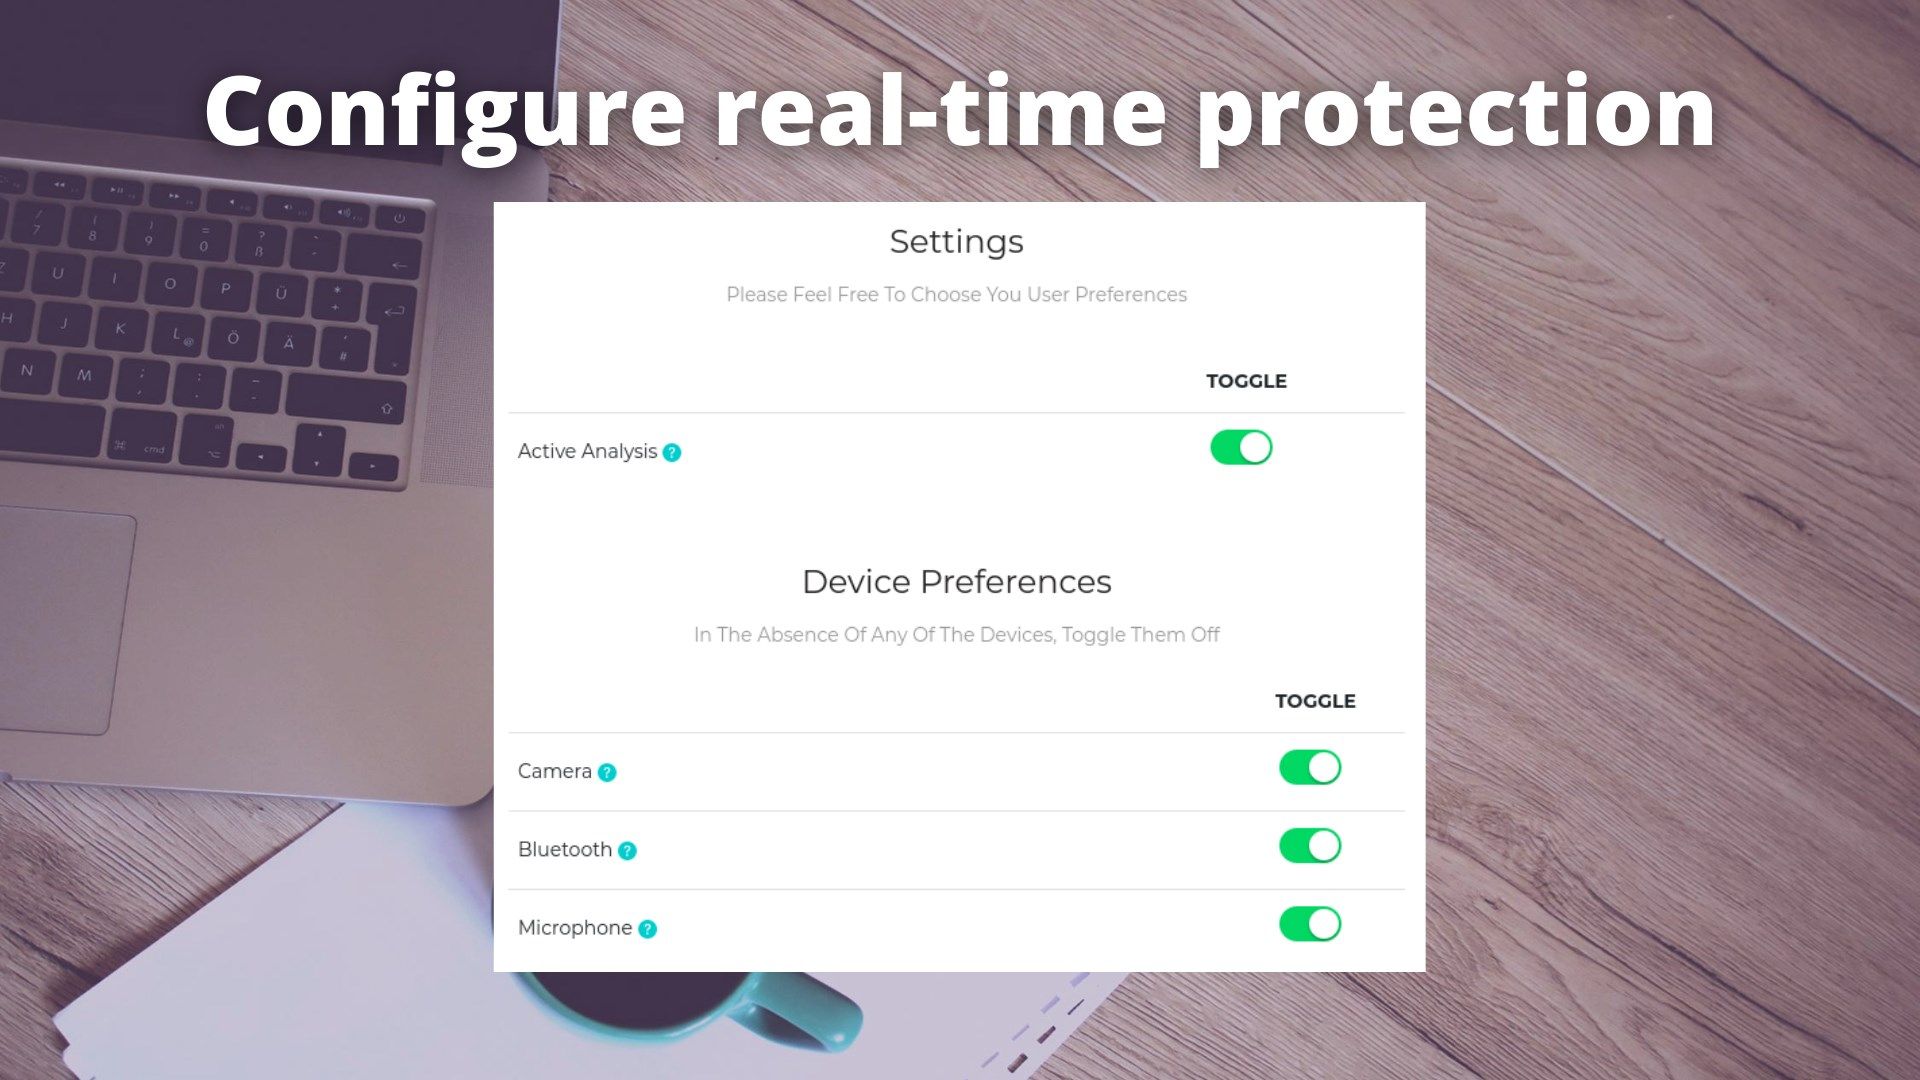 Settings Panel.
Get an active protection on your devices.
Configure your devices and endable/disable them.